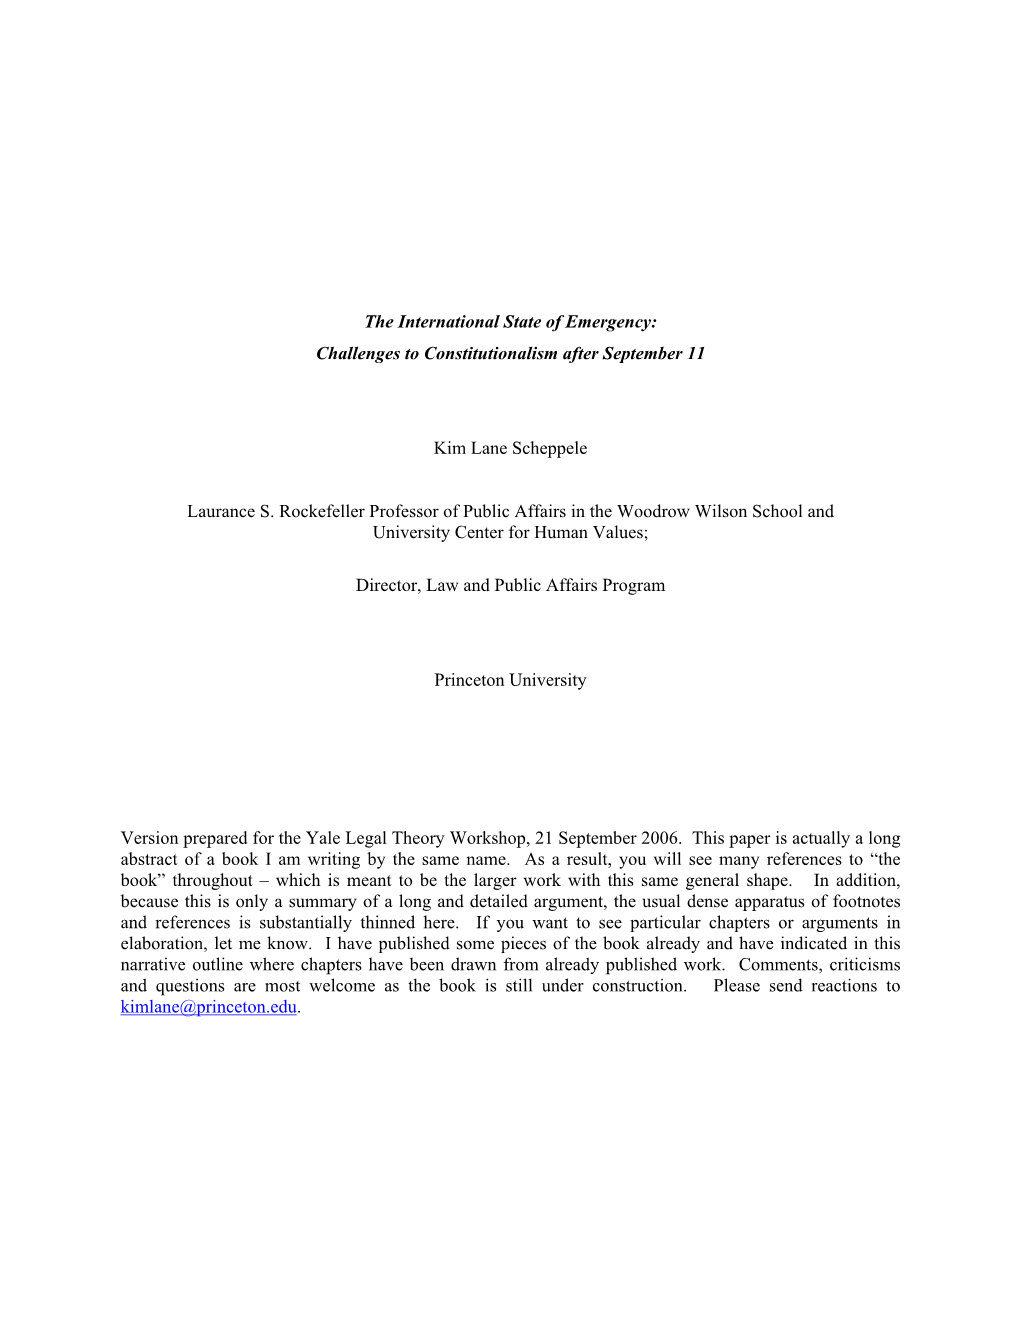 The International State of Emergency: Challenges to Constitutionalism After September 11